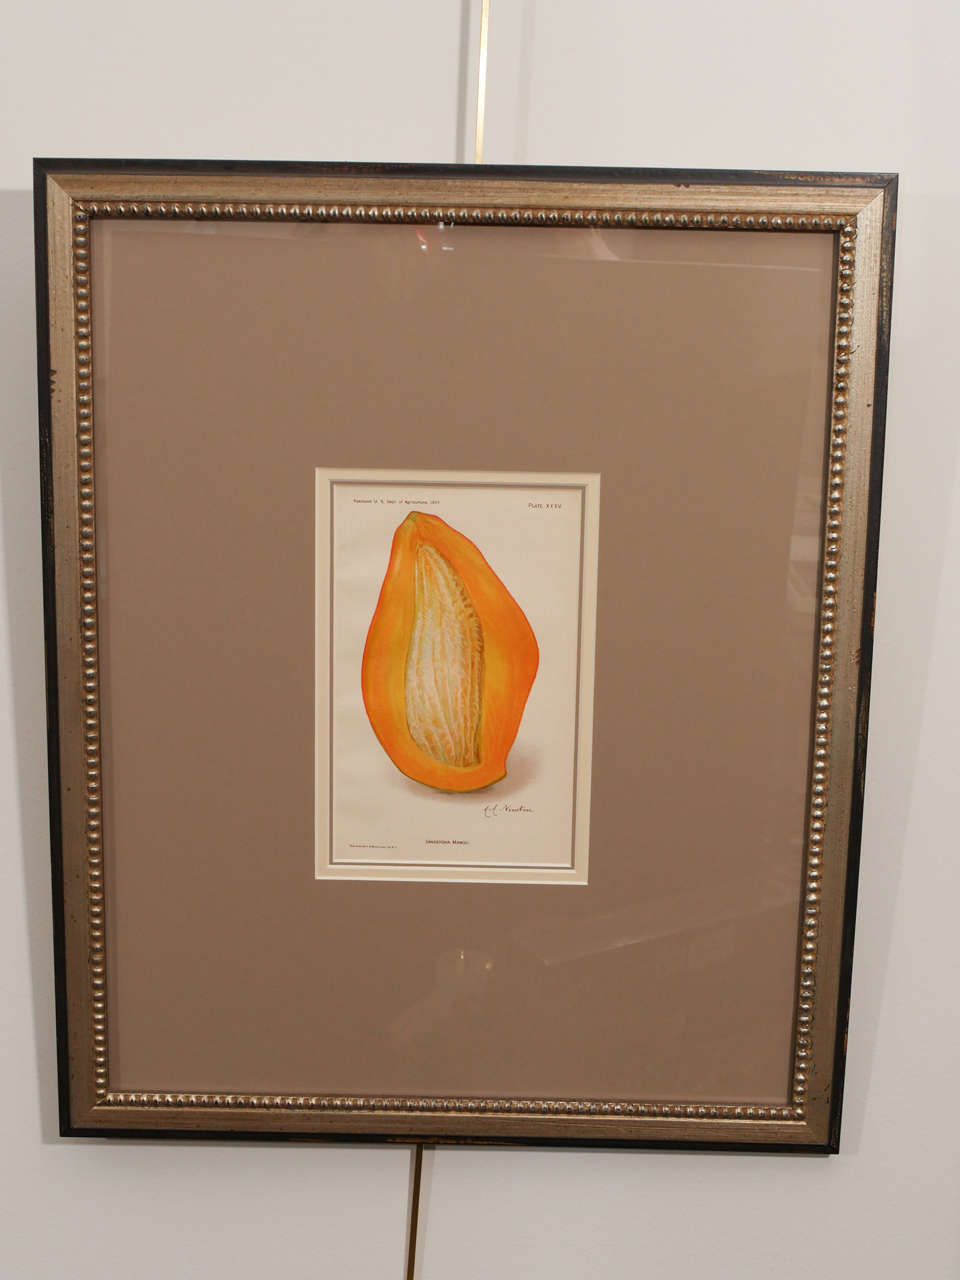 An architectural digest framed print of fruit, circa 1897-1914.